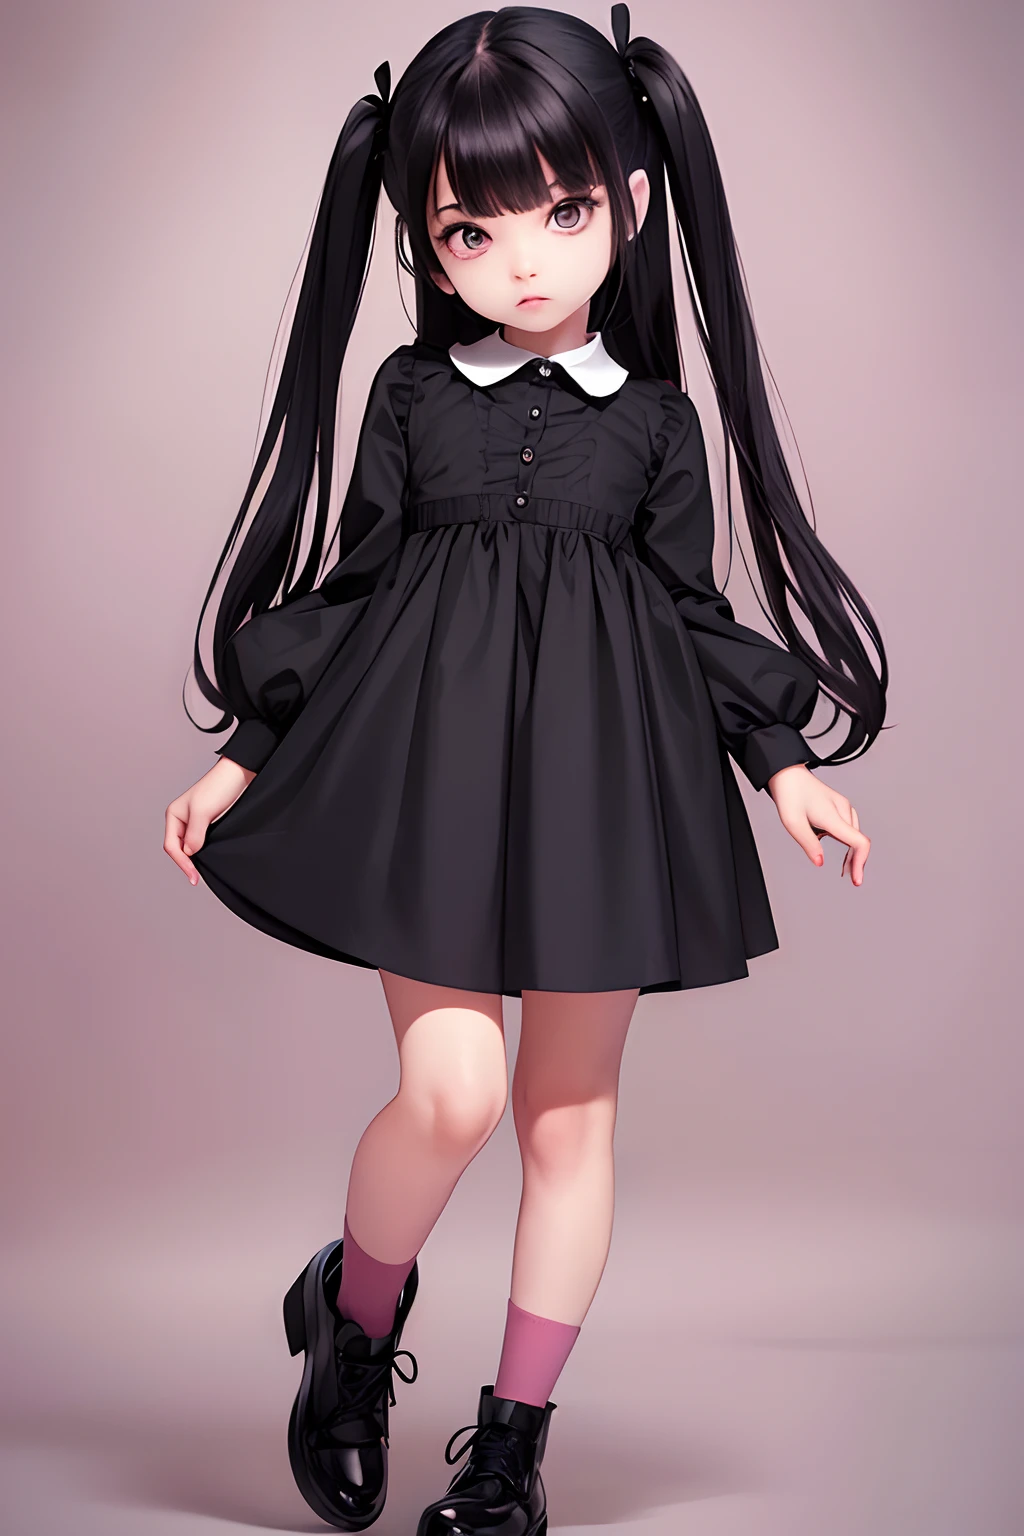  model Two-dimensional Front full body cute Big eyes Black hair Delicate facial features Round face Gothic style uniform Clothes pink Front full body